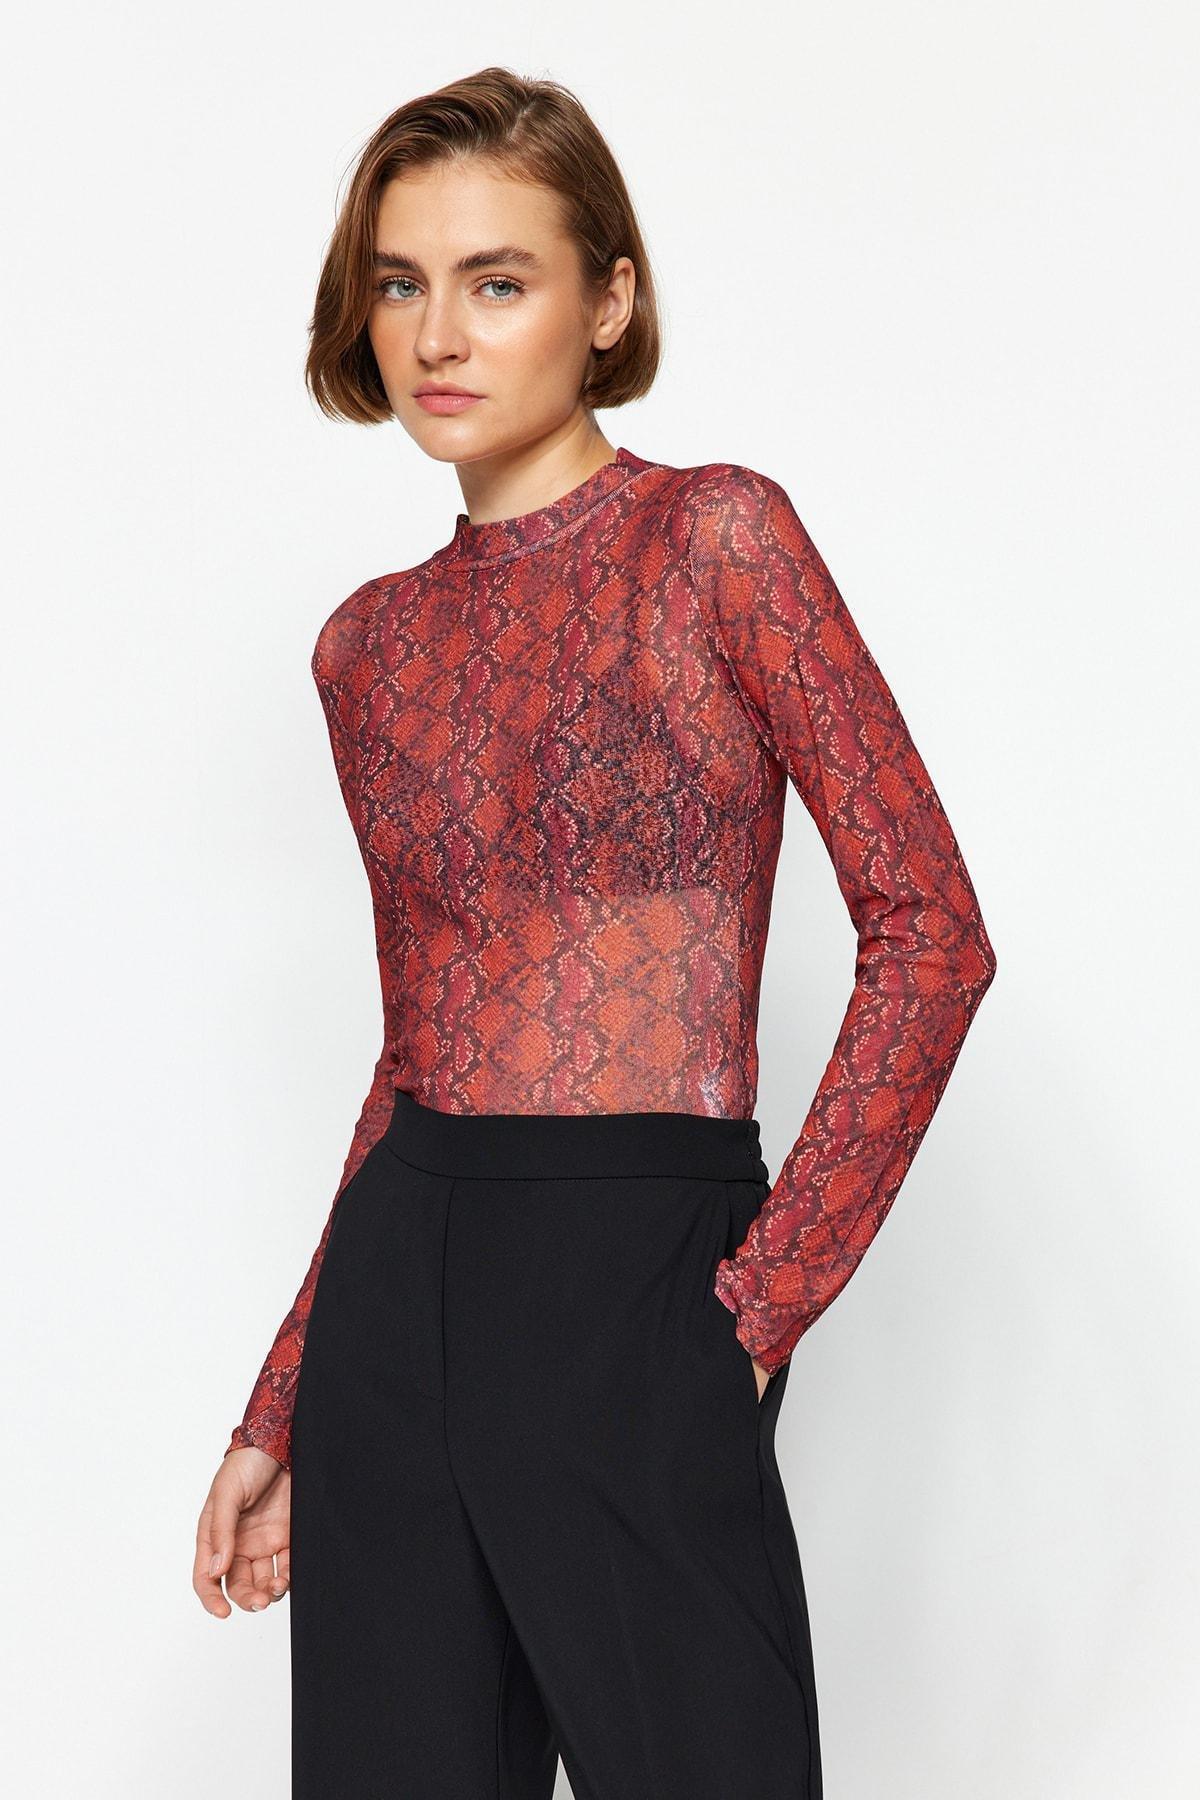 Trendyol - Red Glittery Knitted Blouse